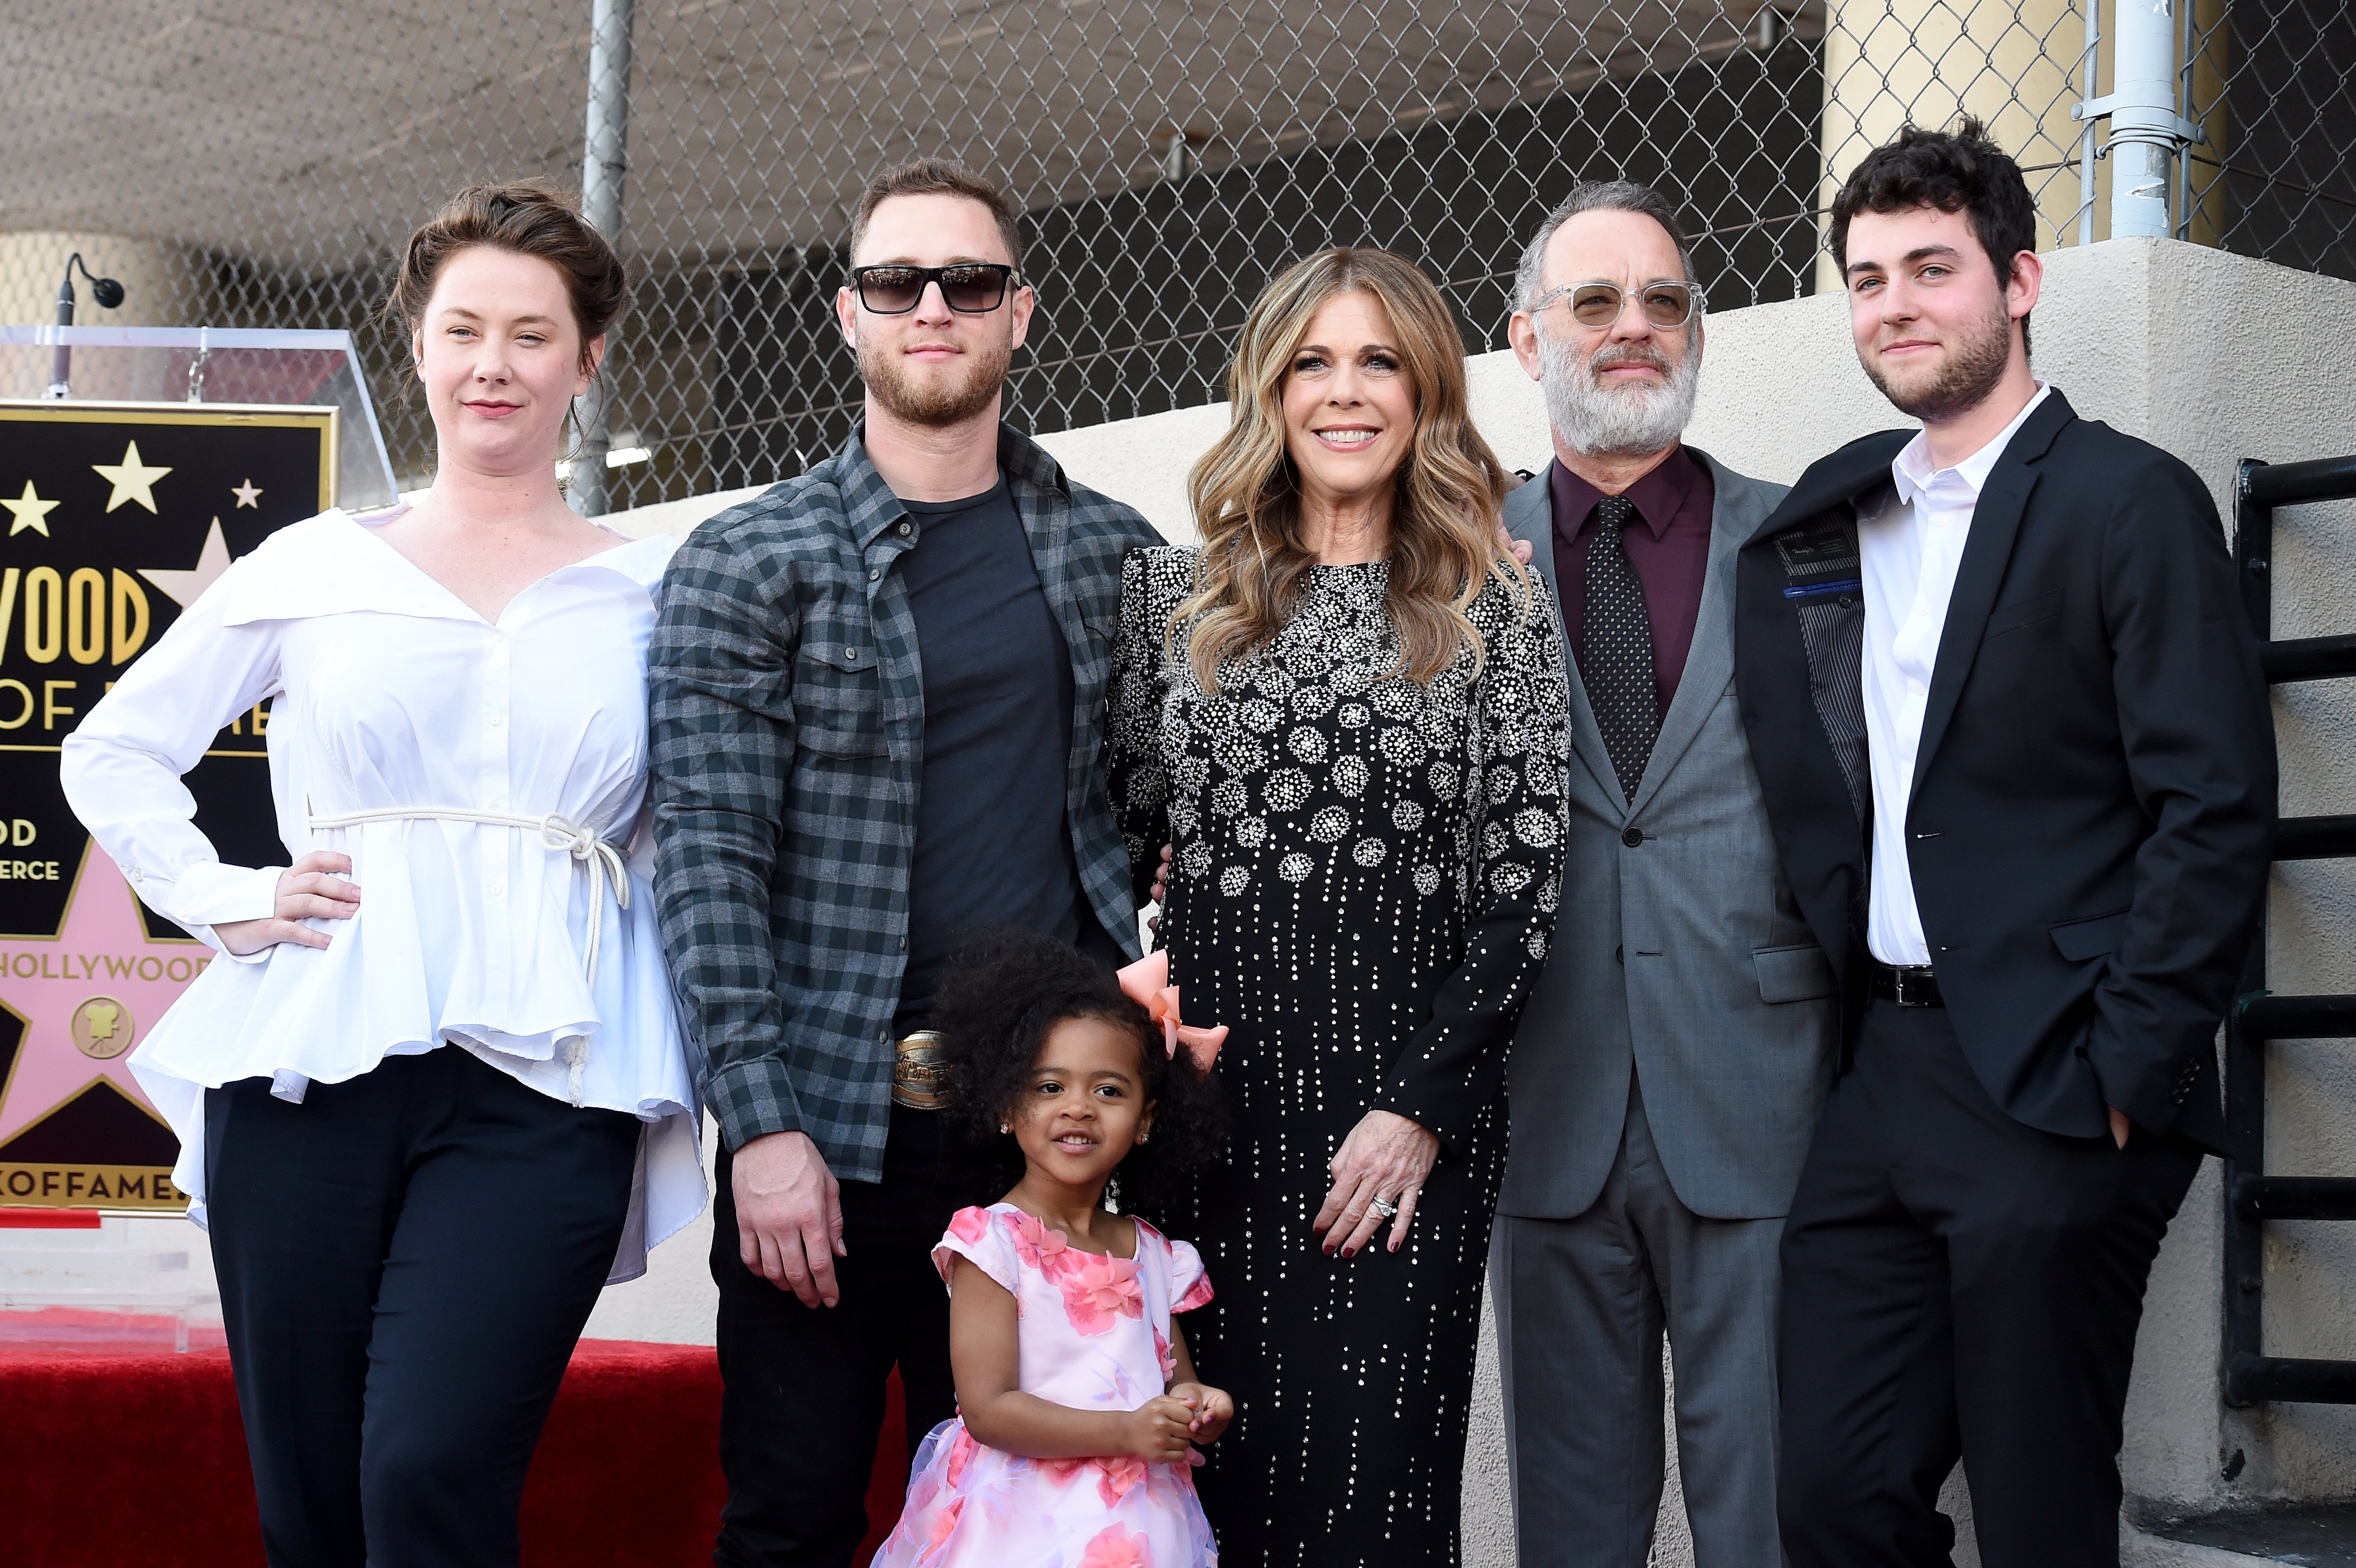 Chet Hanks, Rita Wilson, Tom Hanks and Truman Hanks attend the ceremony honoring Rita Wilson with Star on the Hollywood Walk of Fame on March 29, 2019 in Hollywood, California | Source: Getty Images